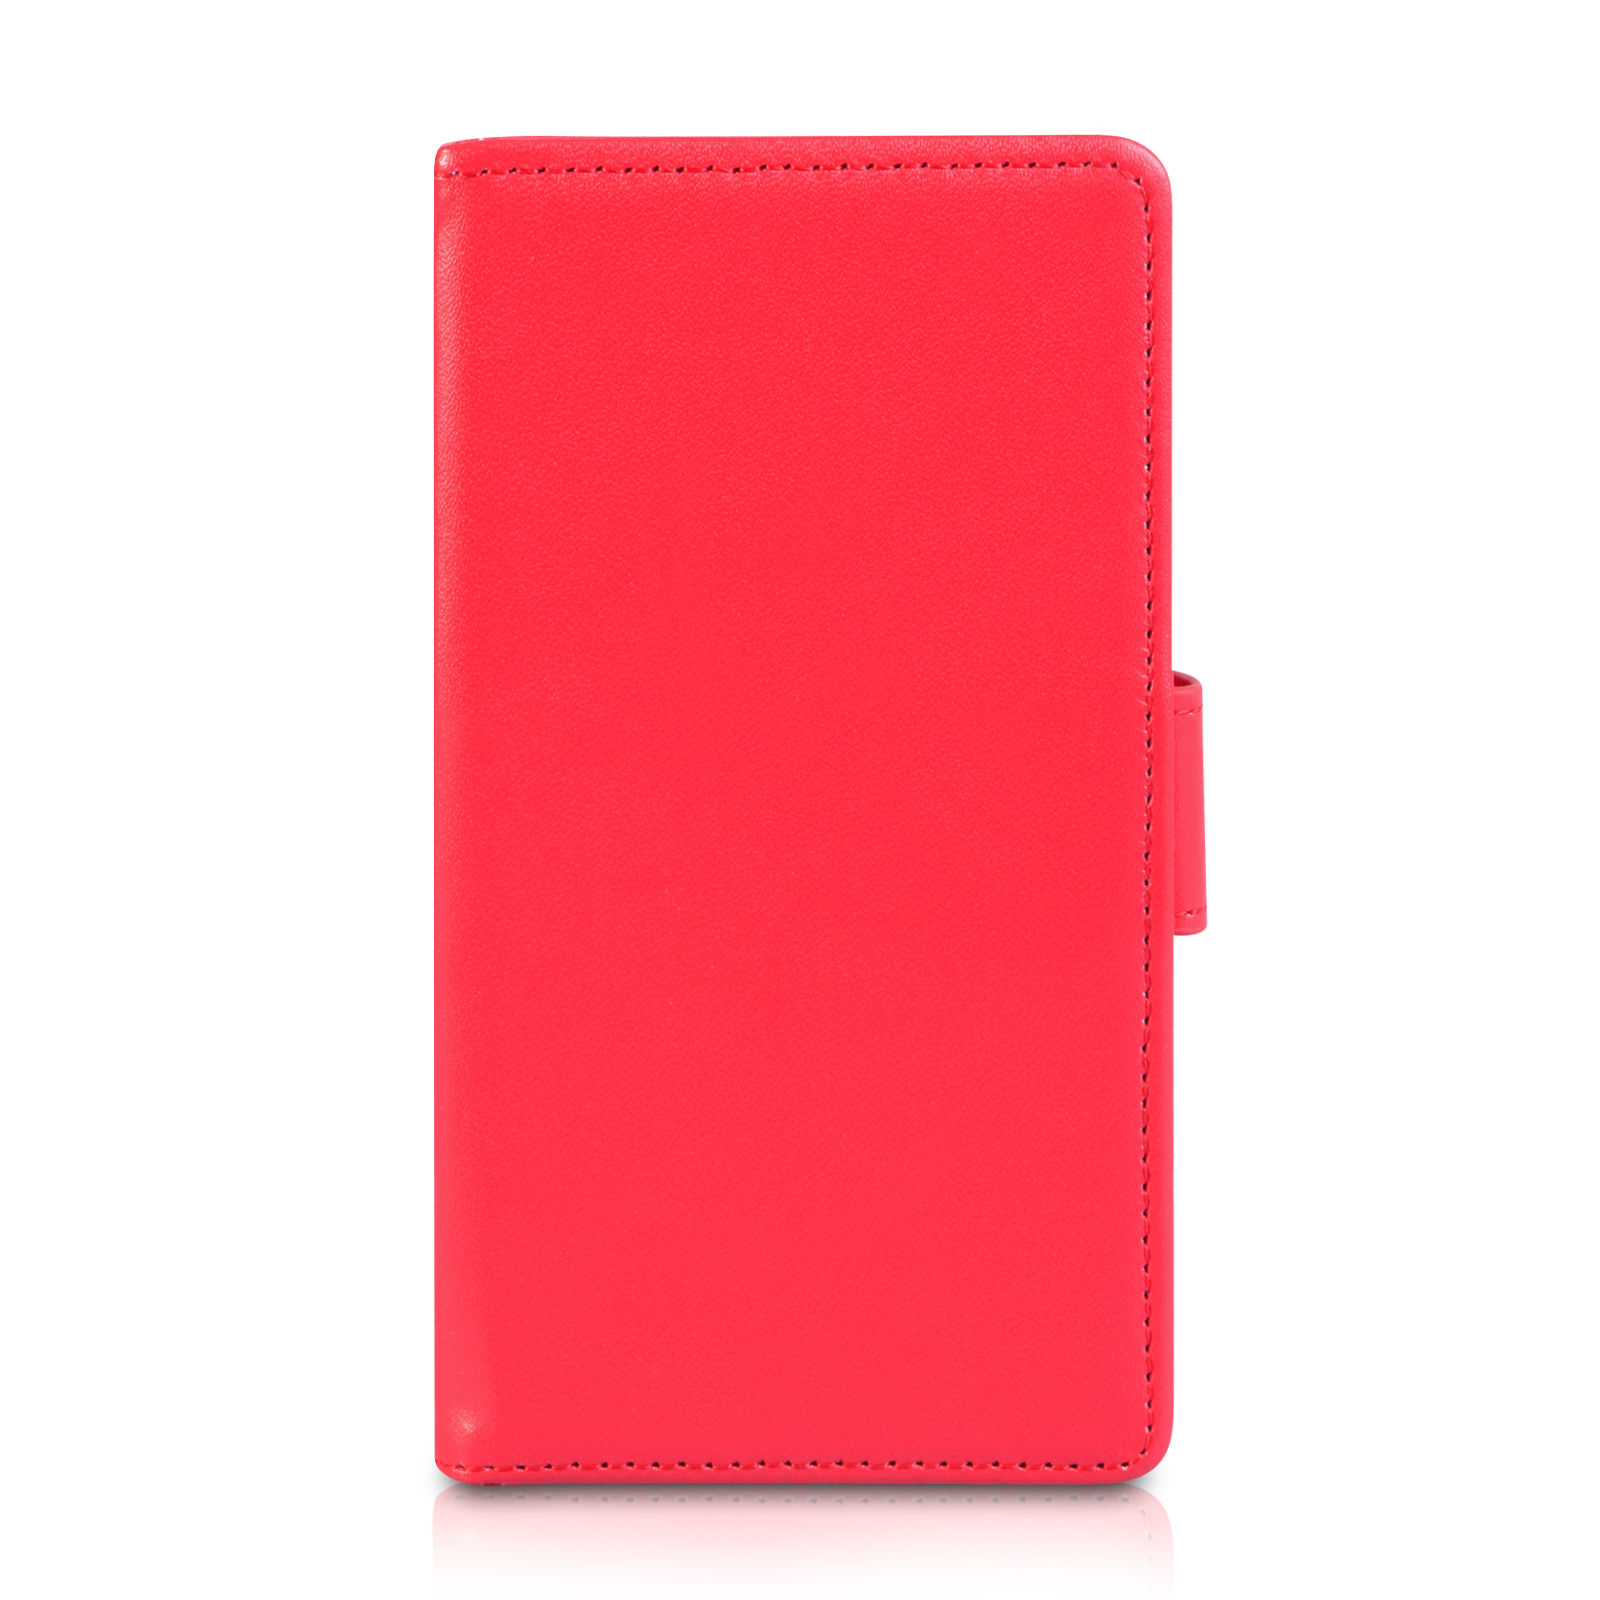 YouSave Accessories LG L70 Leather-Effect Wallet Case - Red